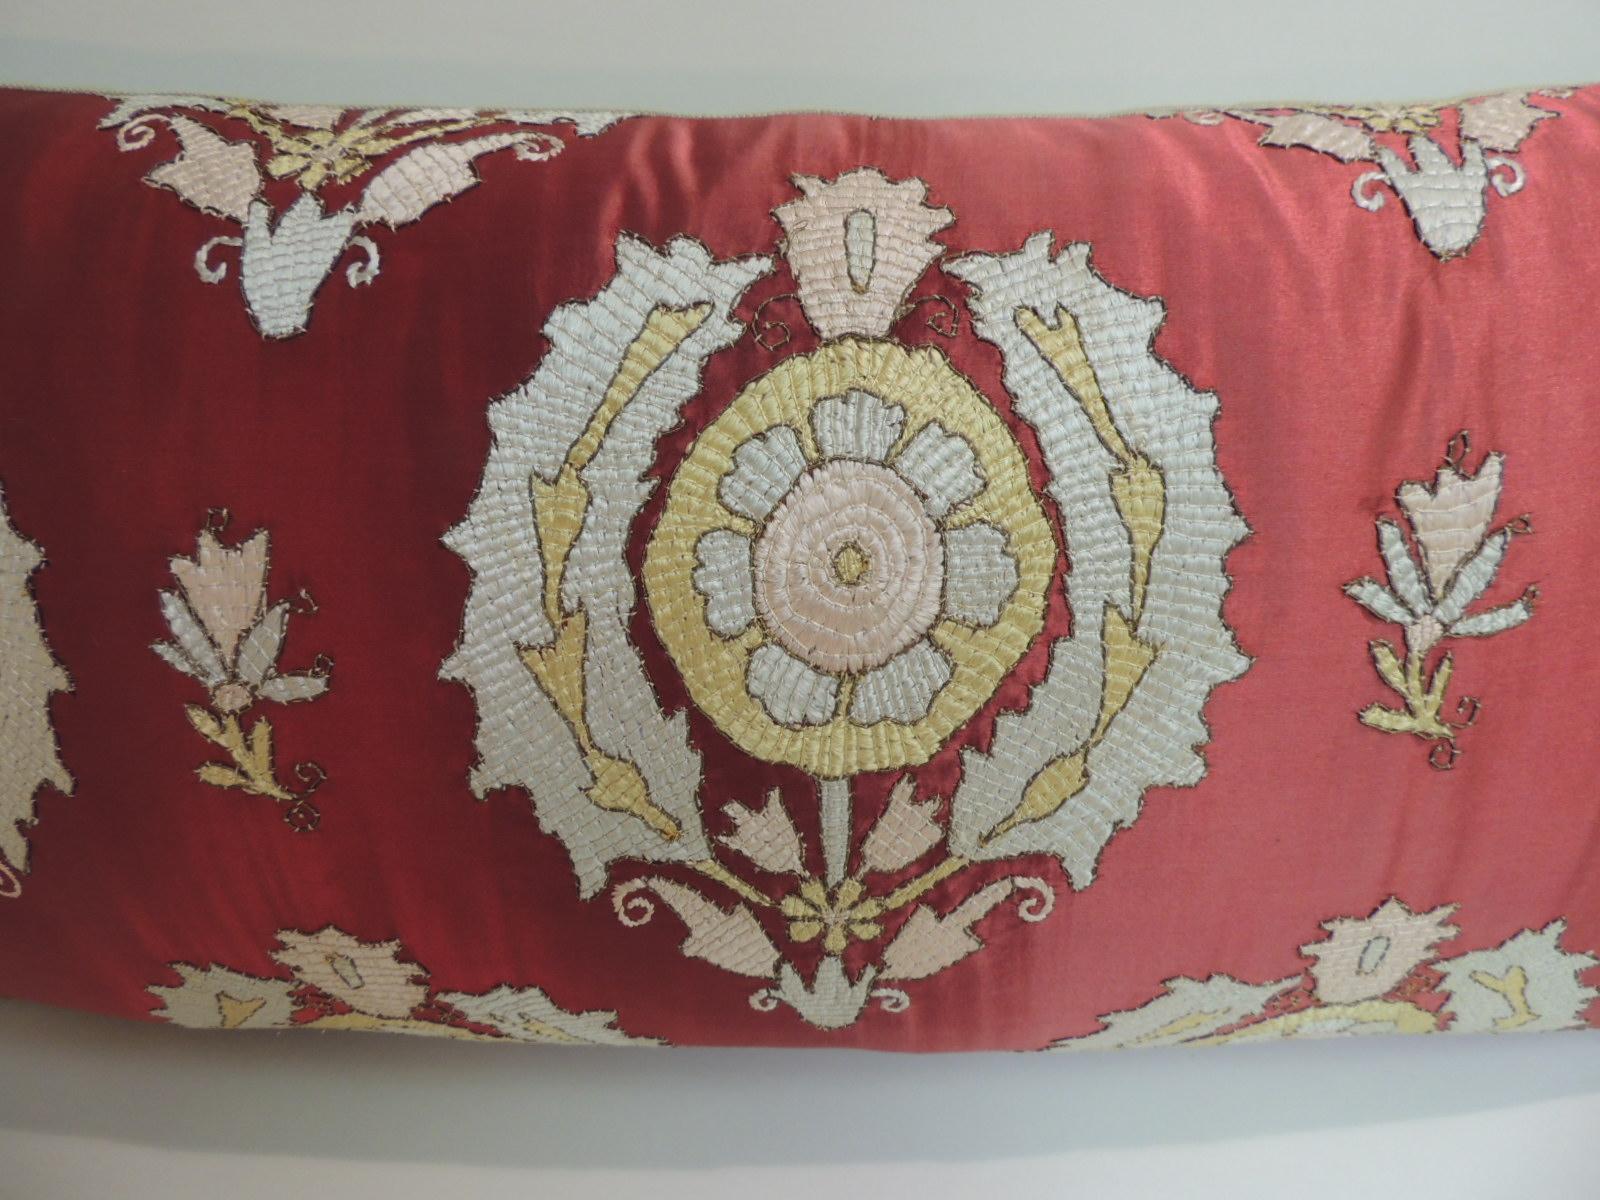 Antique red and green silk embroidered applique long bolster decorative pillow.
Pink, green and red embroidery with metallic threads. Decorative trim on the bottom of the pillow.
Celadon glazed linen in the back.
Decorative pillow handcrafted and